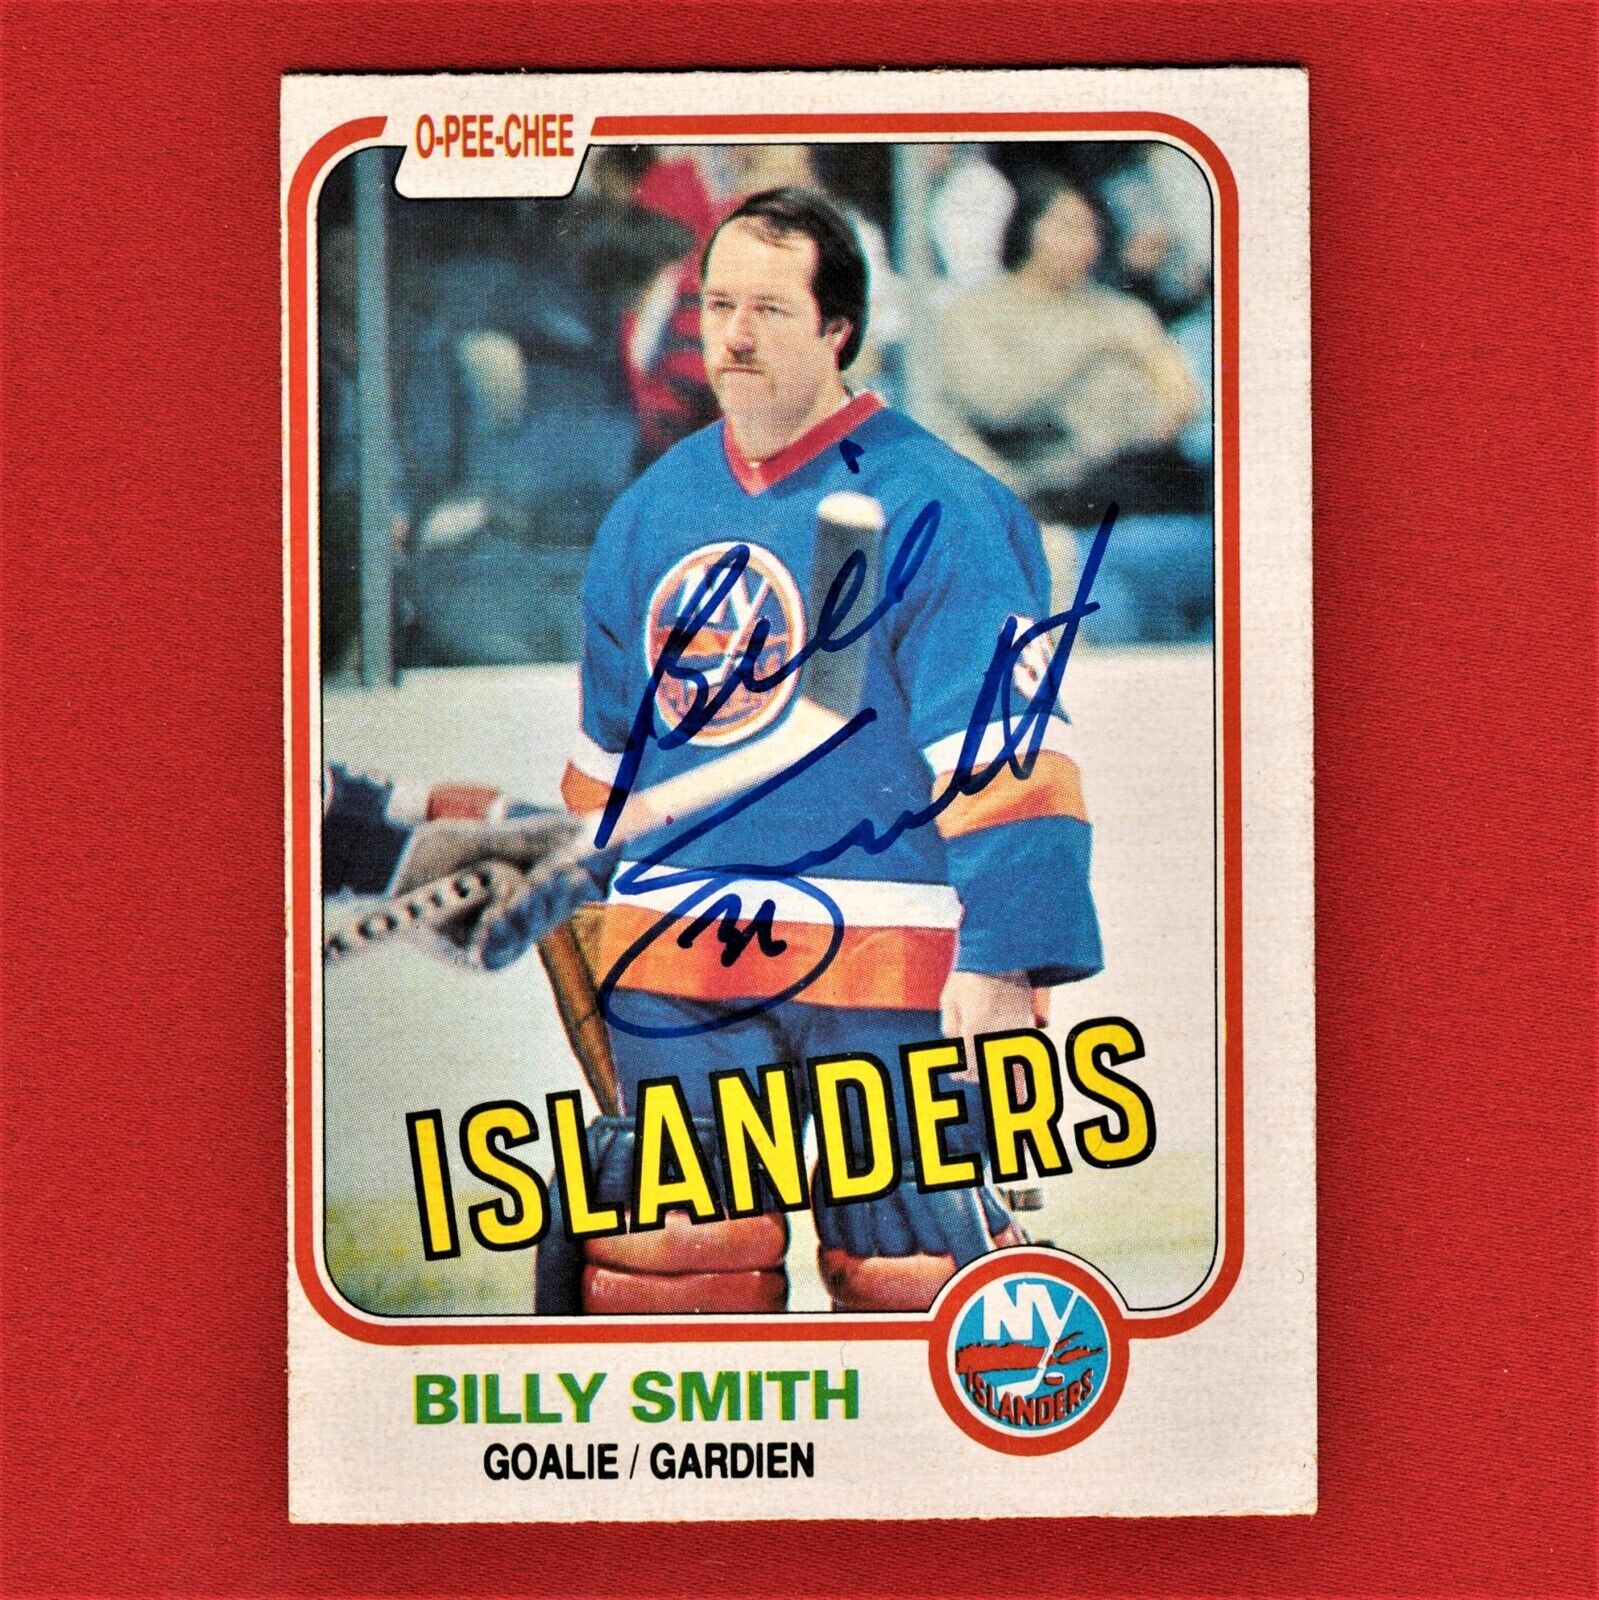 Autographed Billy Smith 1981 O-pee-chee Card 207 A3